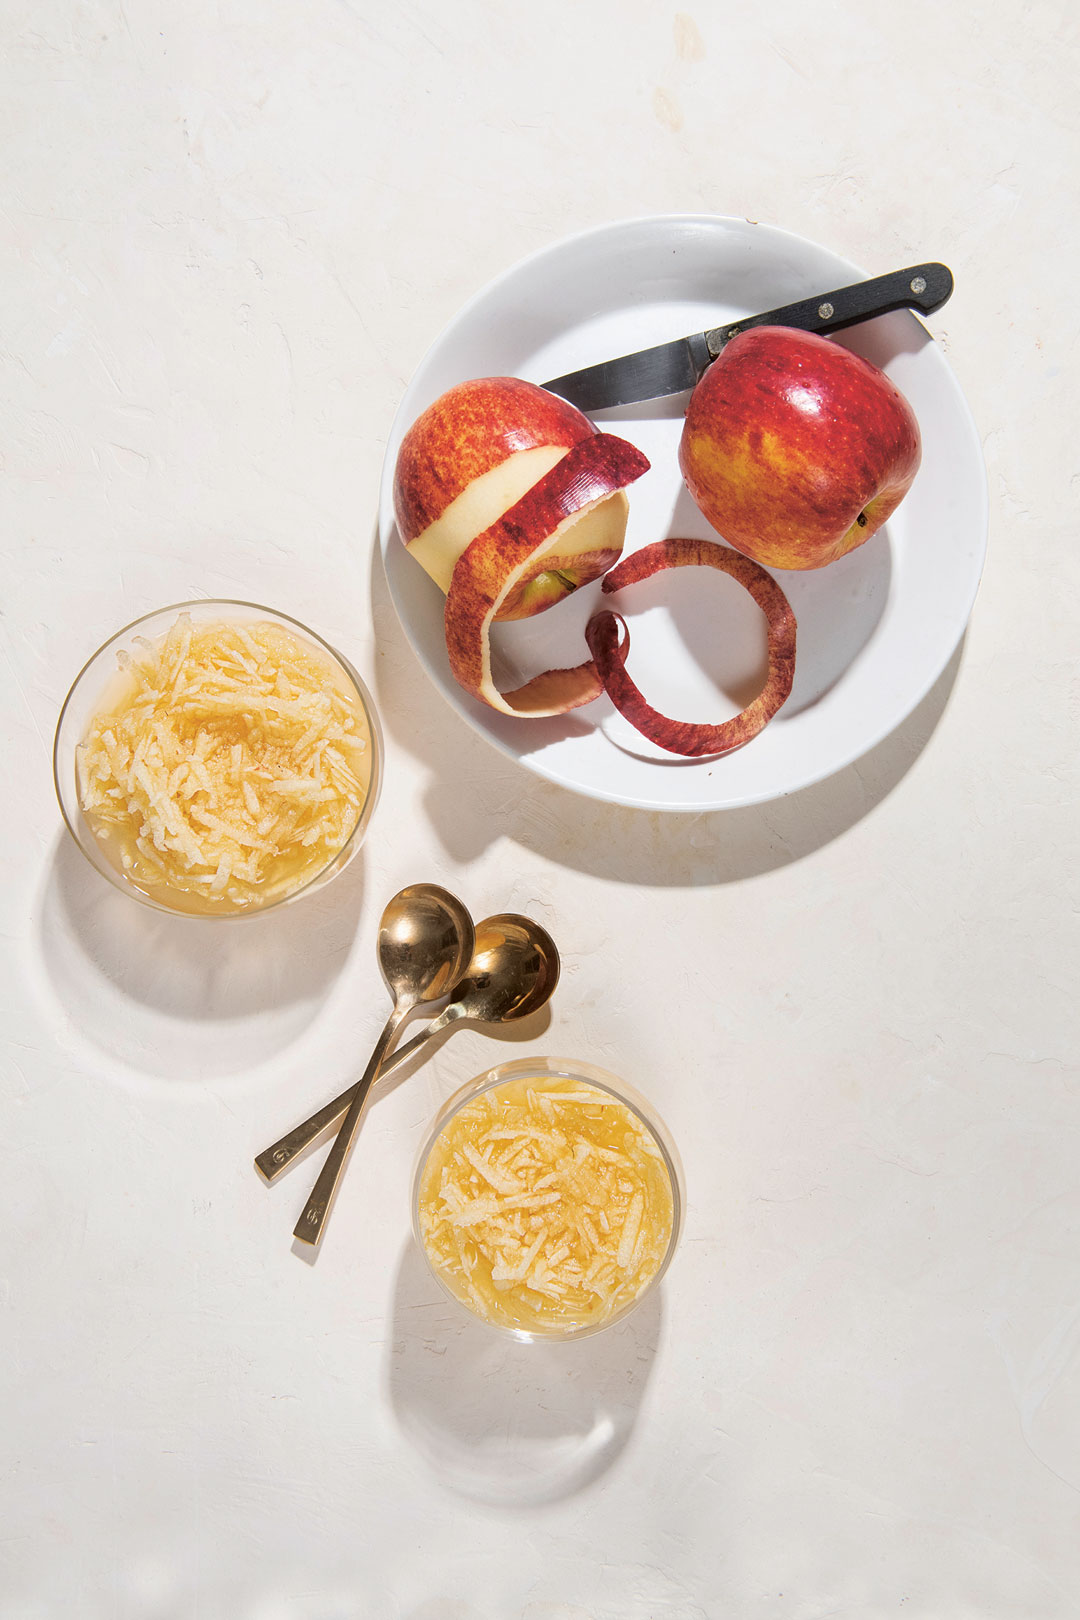 Chilled Apples with Rose Water